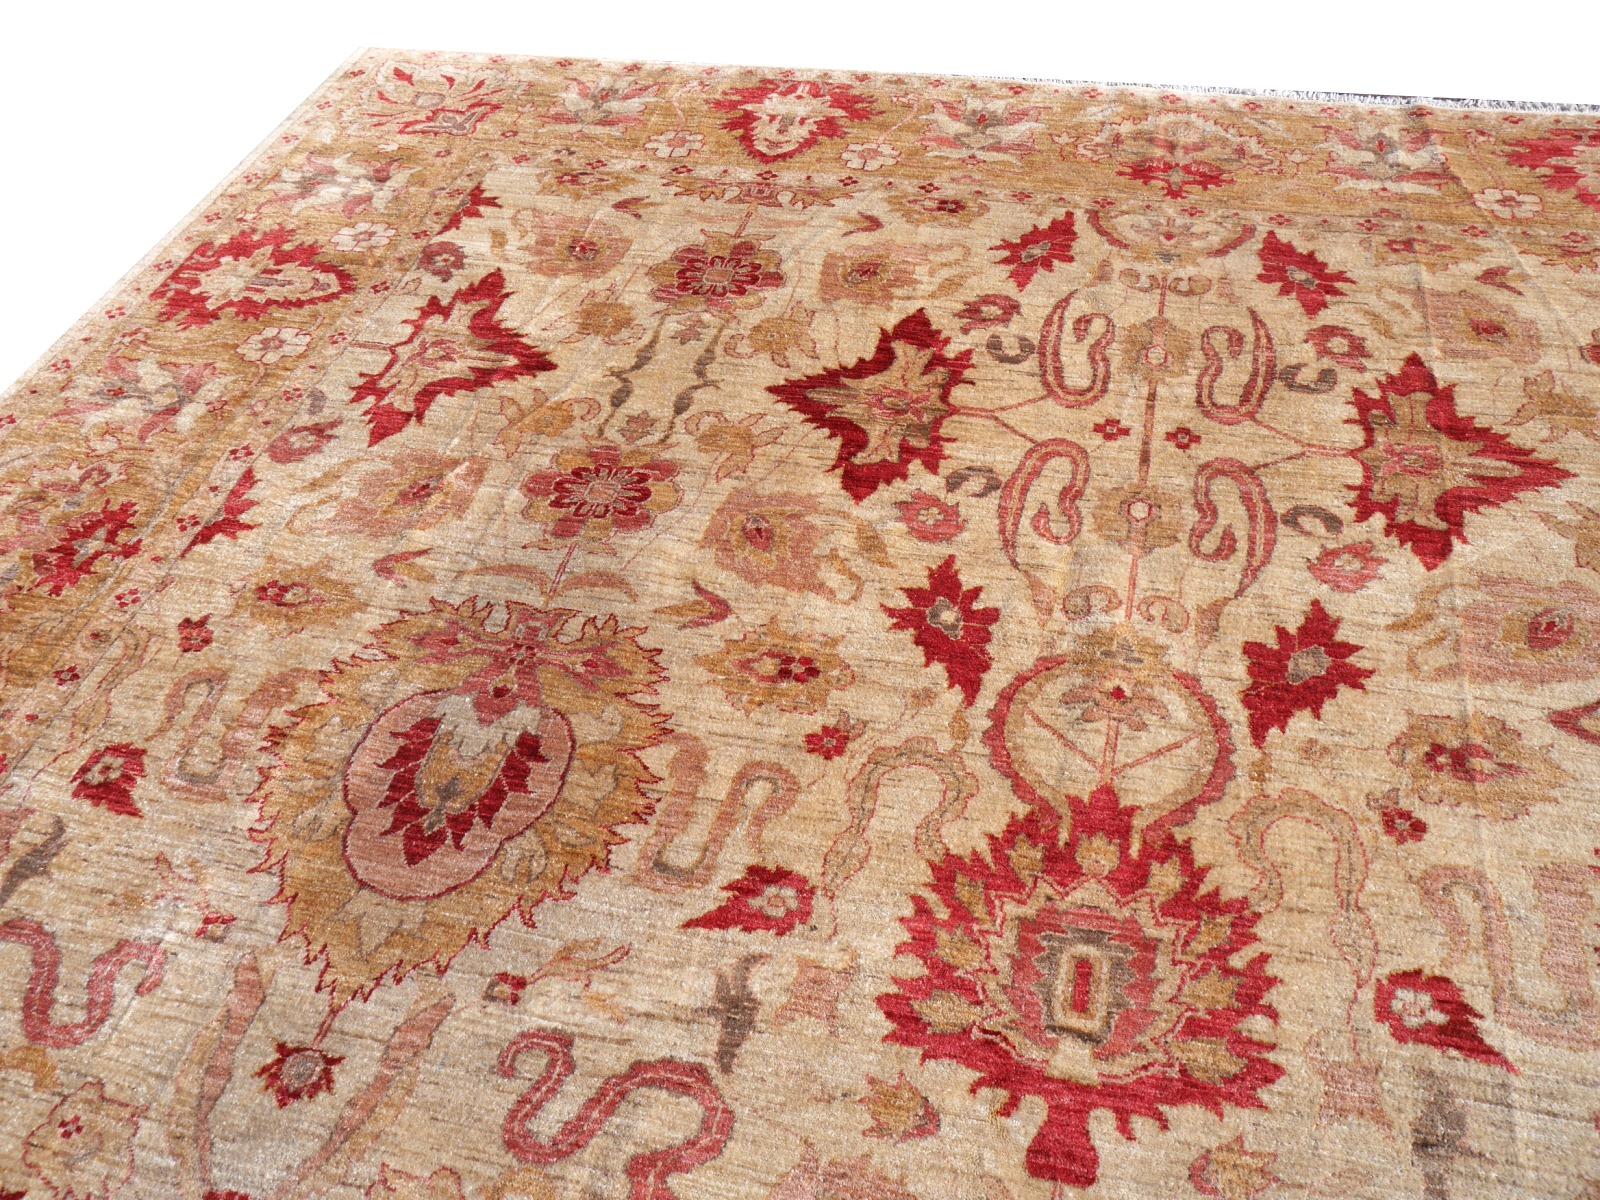 20th Century 18 x 13 ft Rug in Style of Farahan Ziegler Oversized Hand-Knotted 550 x 400 cm For Sale